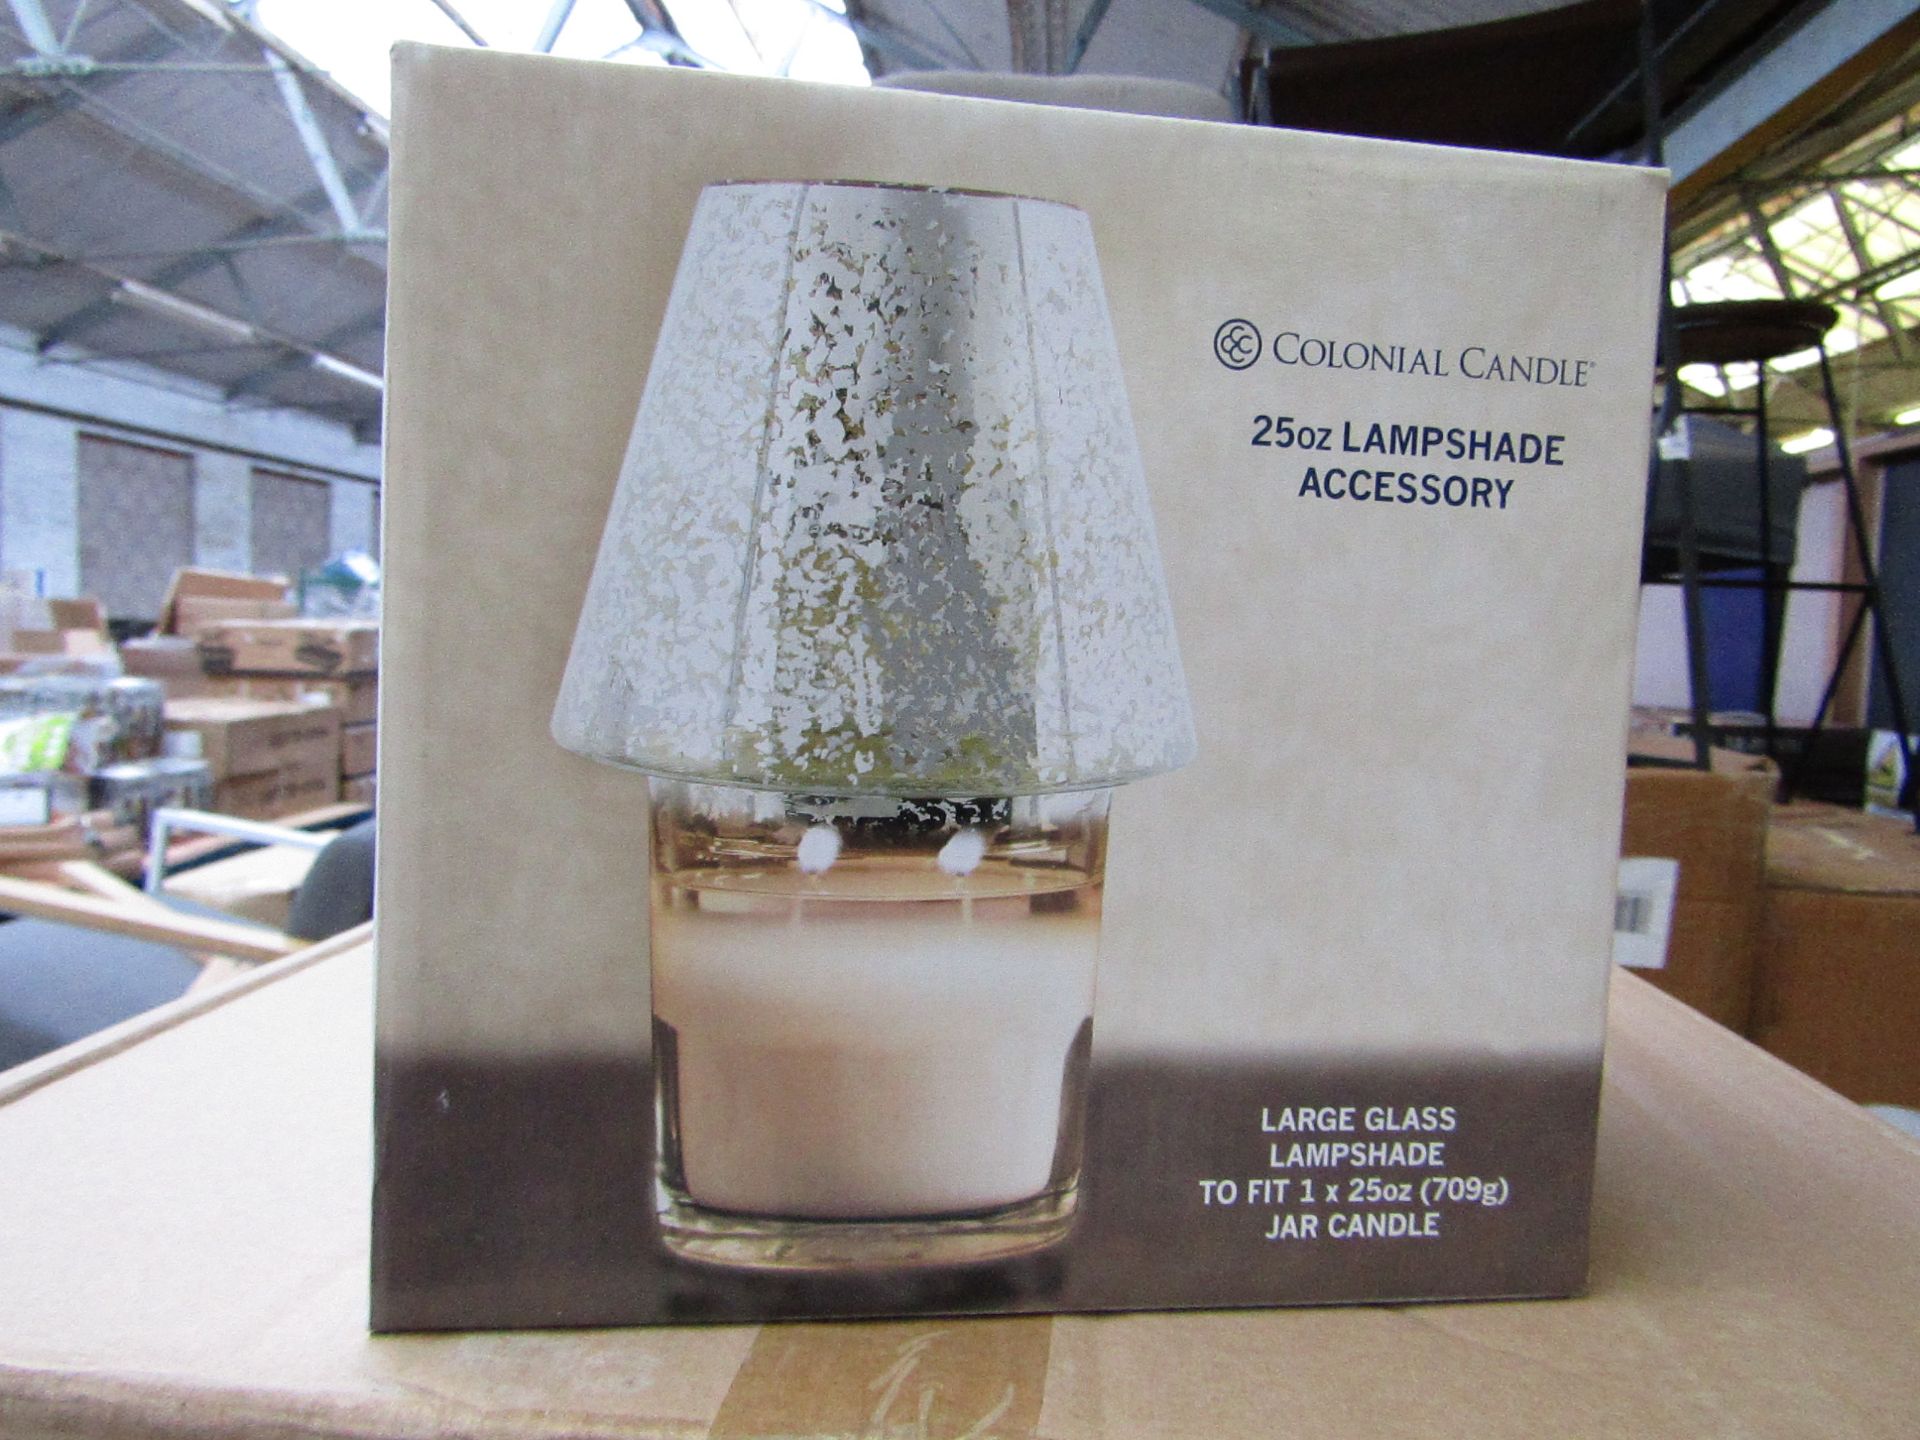 2x Colonial Candle 25oz Lamp shade accessory for Jar candles, new and boxed, please note this does